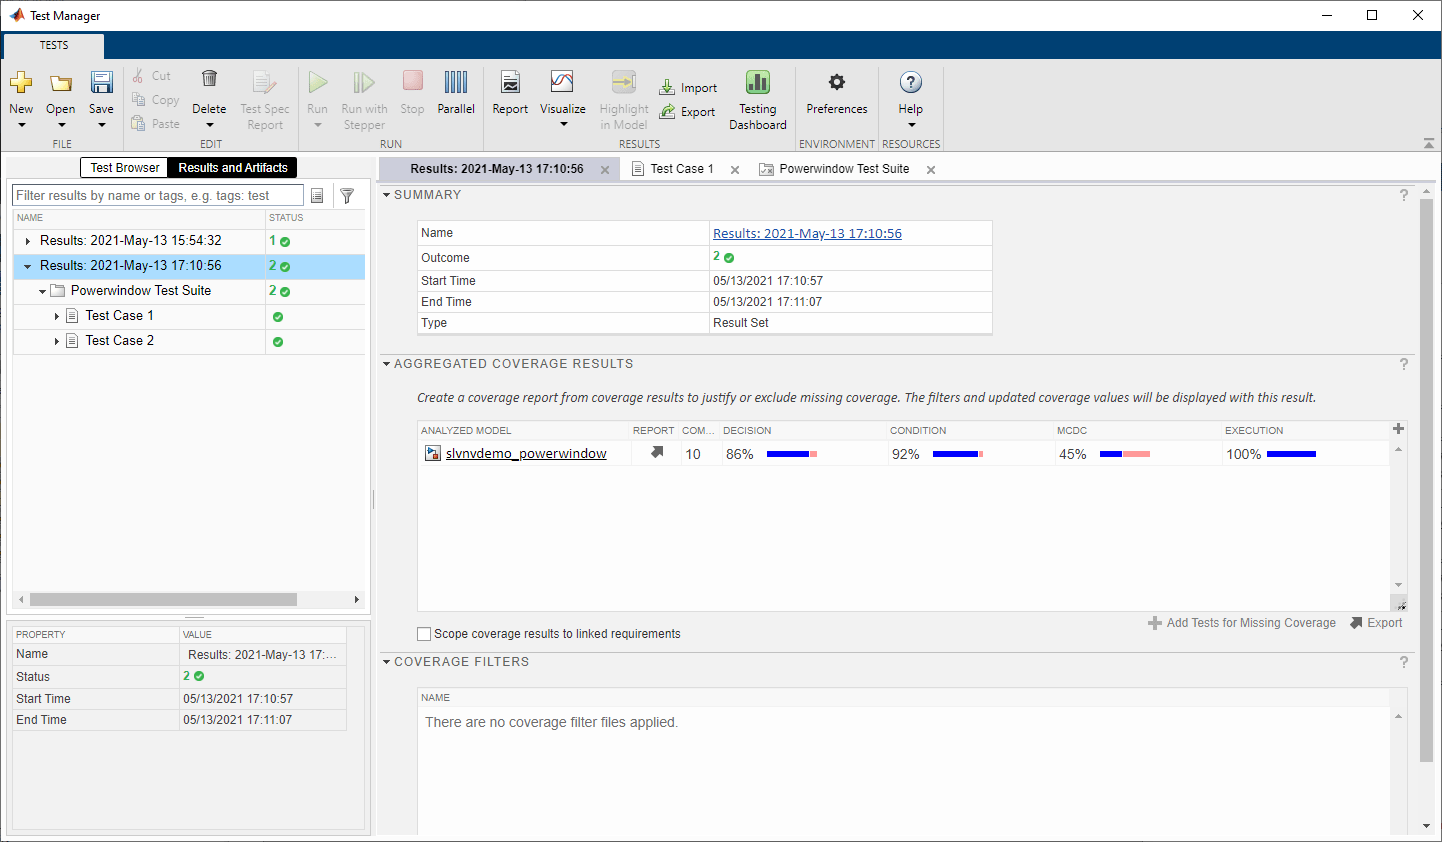 Test Manager on the Results and Artifacts tab with Powerwindow Test Suite selected. Coverage results are: 86% decision, 92% condition, 45% MCDC, and 100% execution.